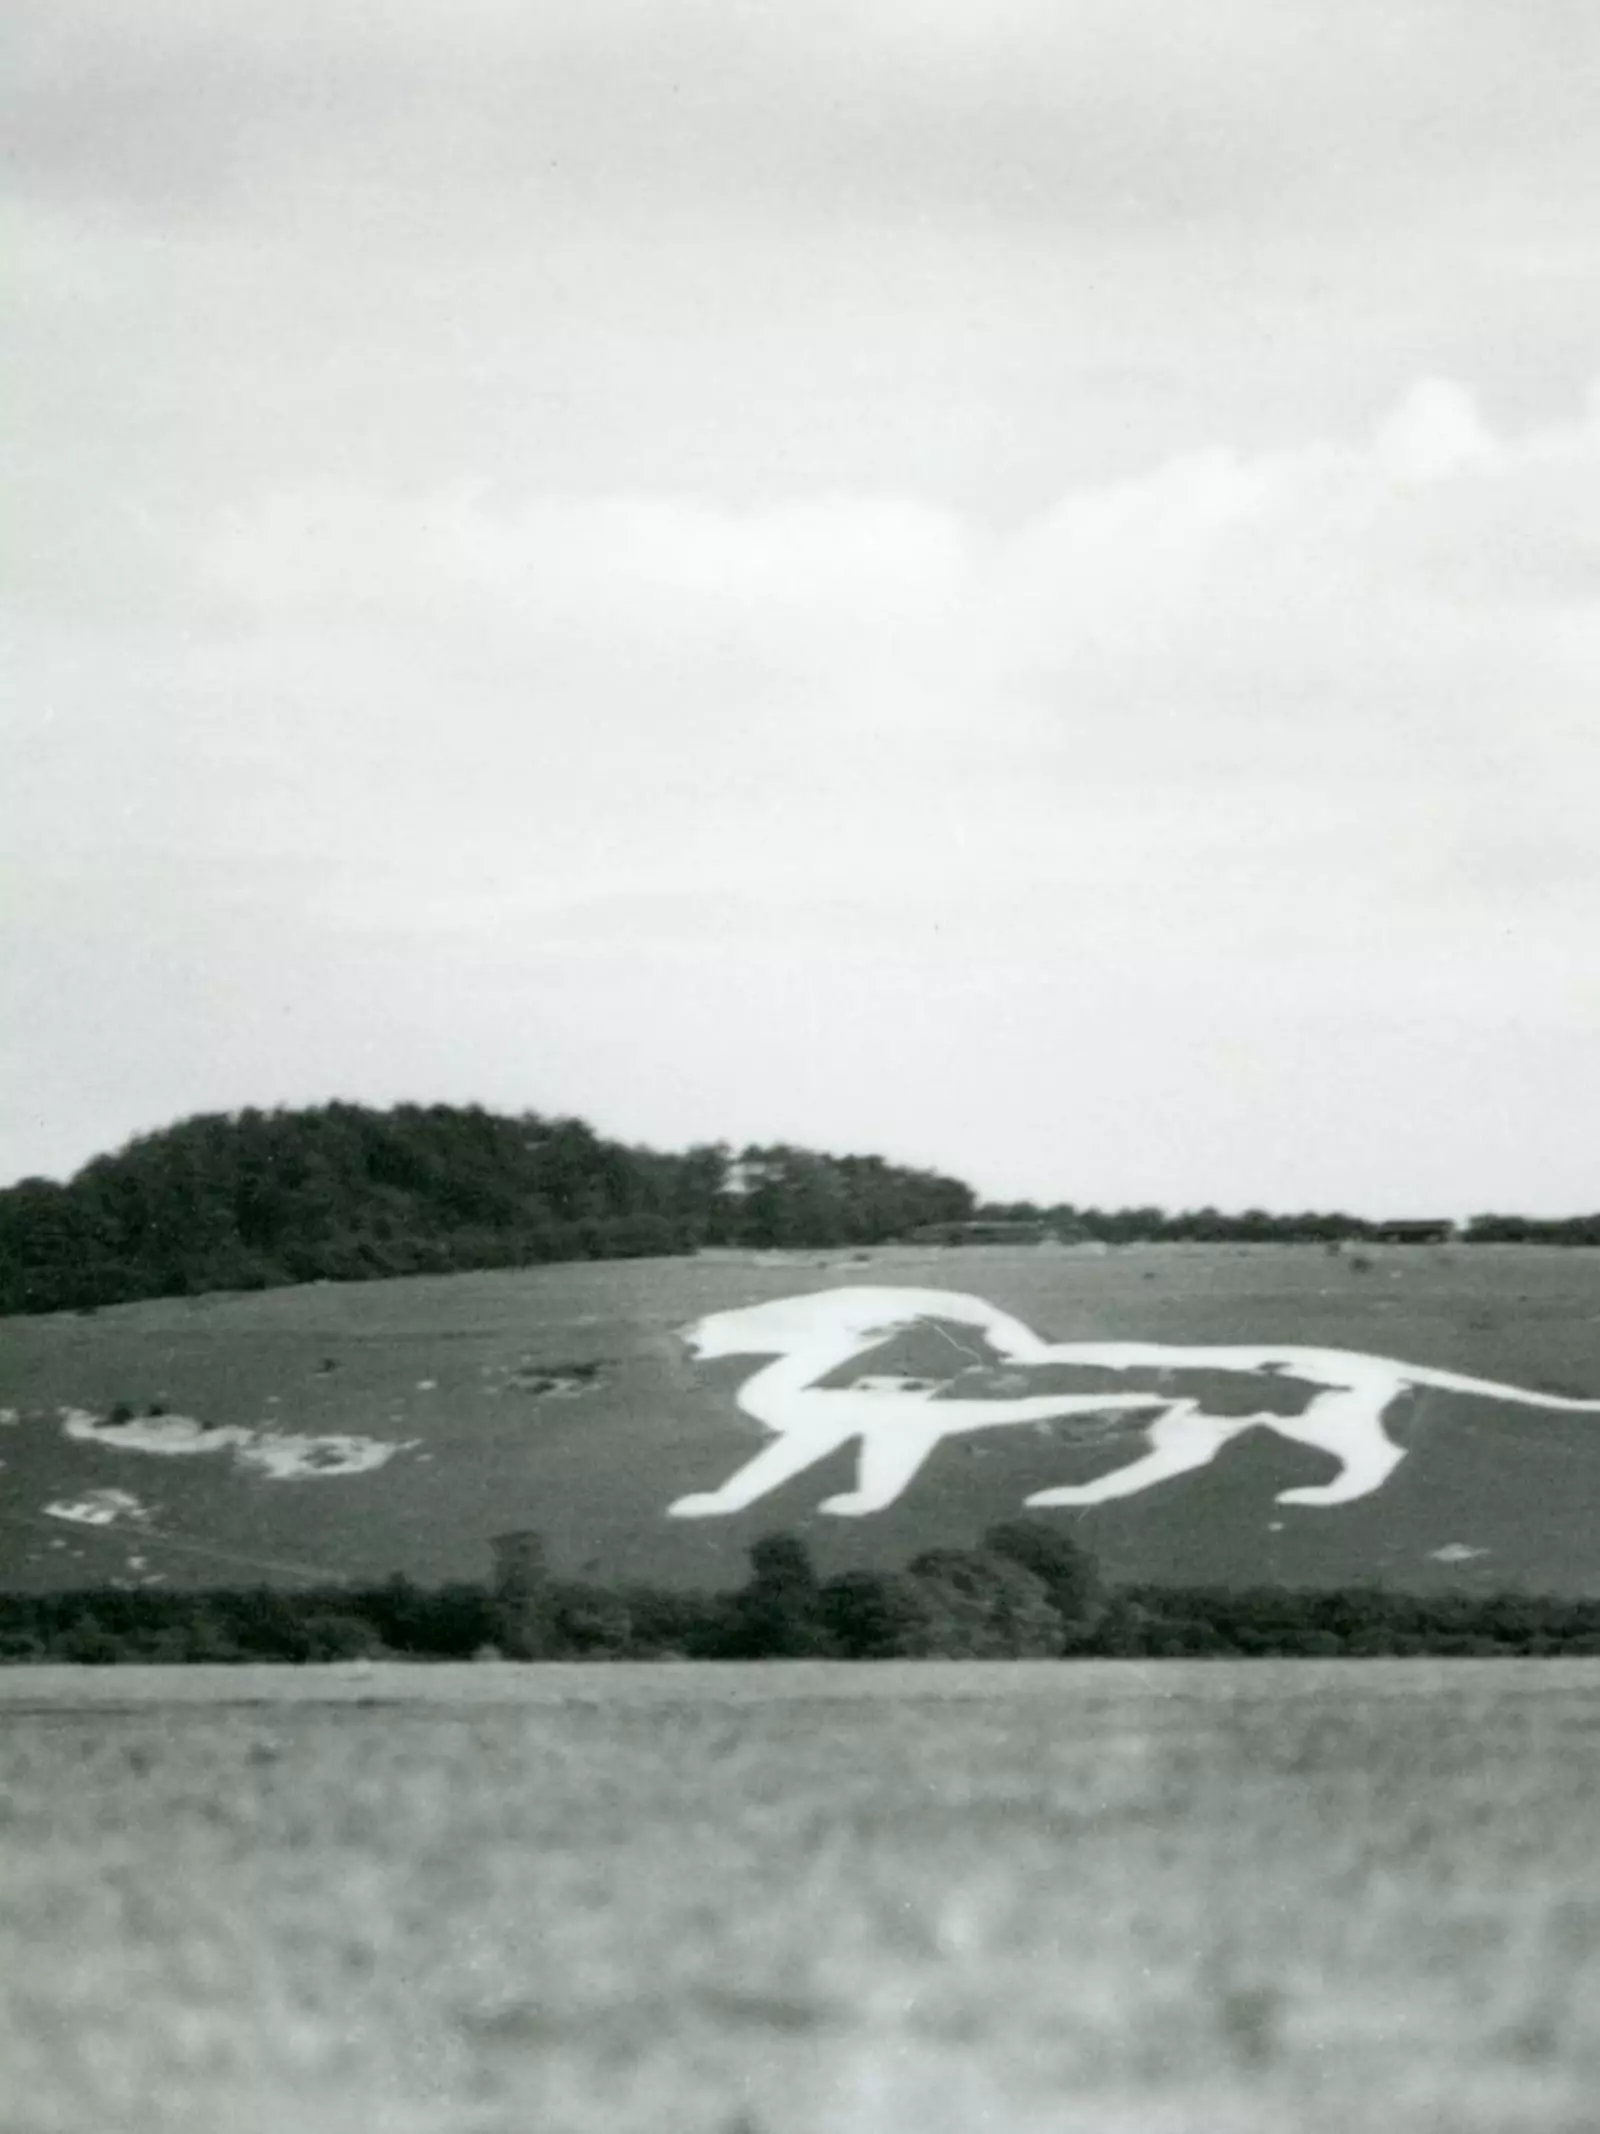 Black and white image of the white lion landscaping at Whipsnade Zoo in 1932